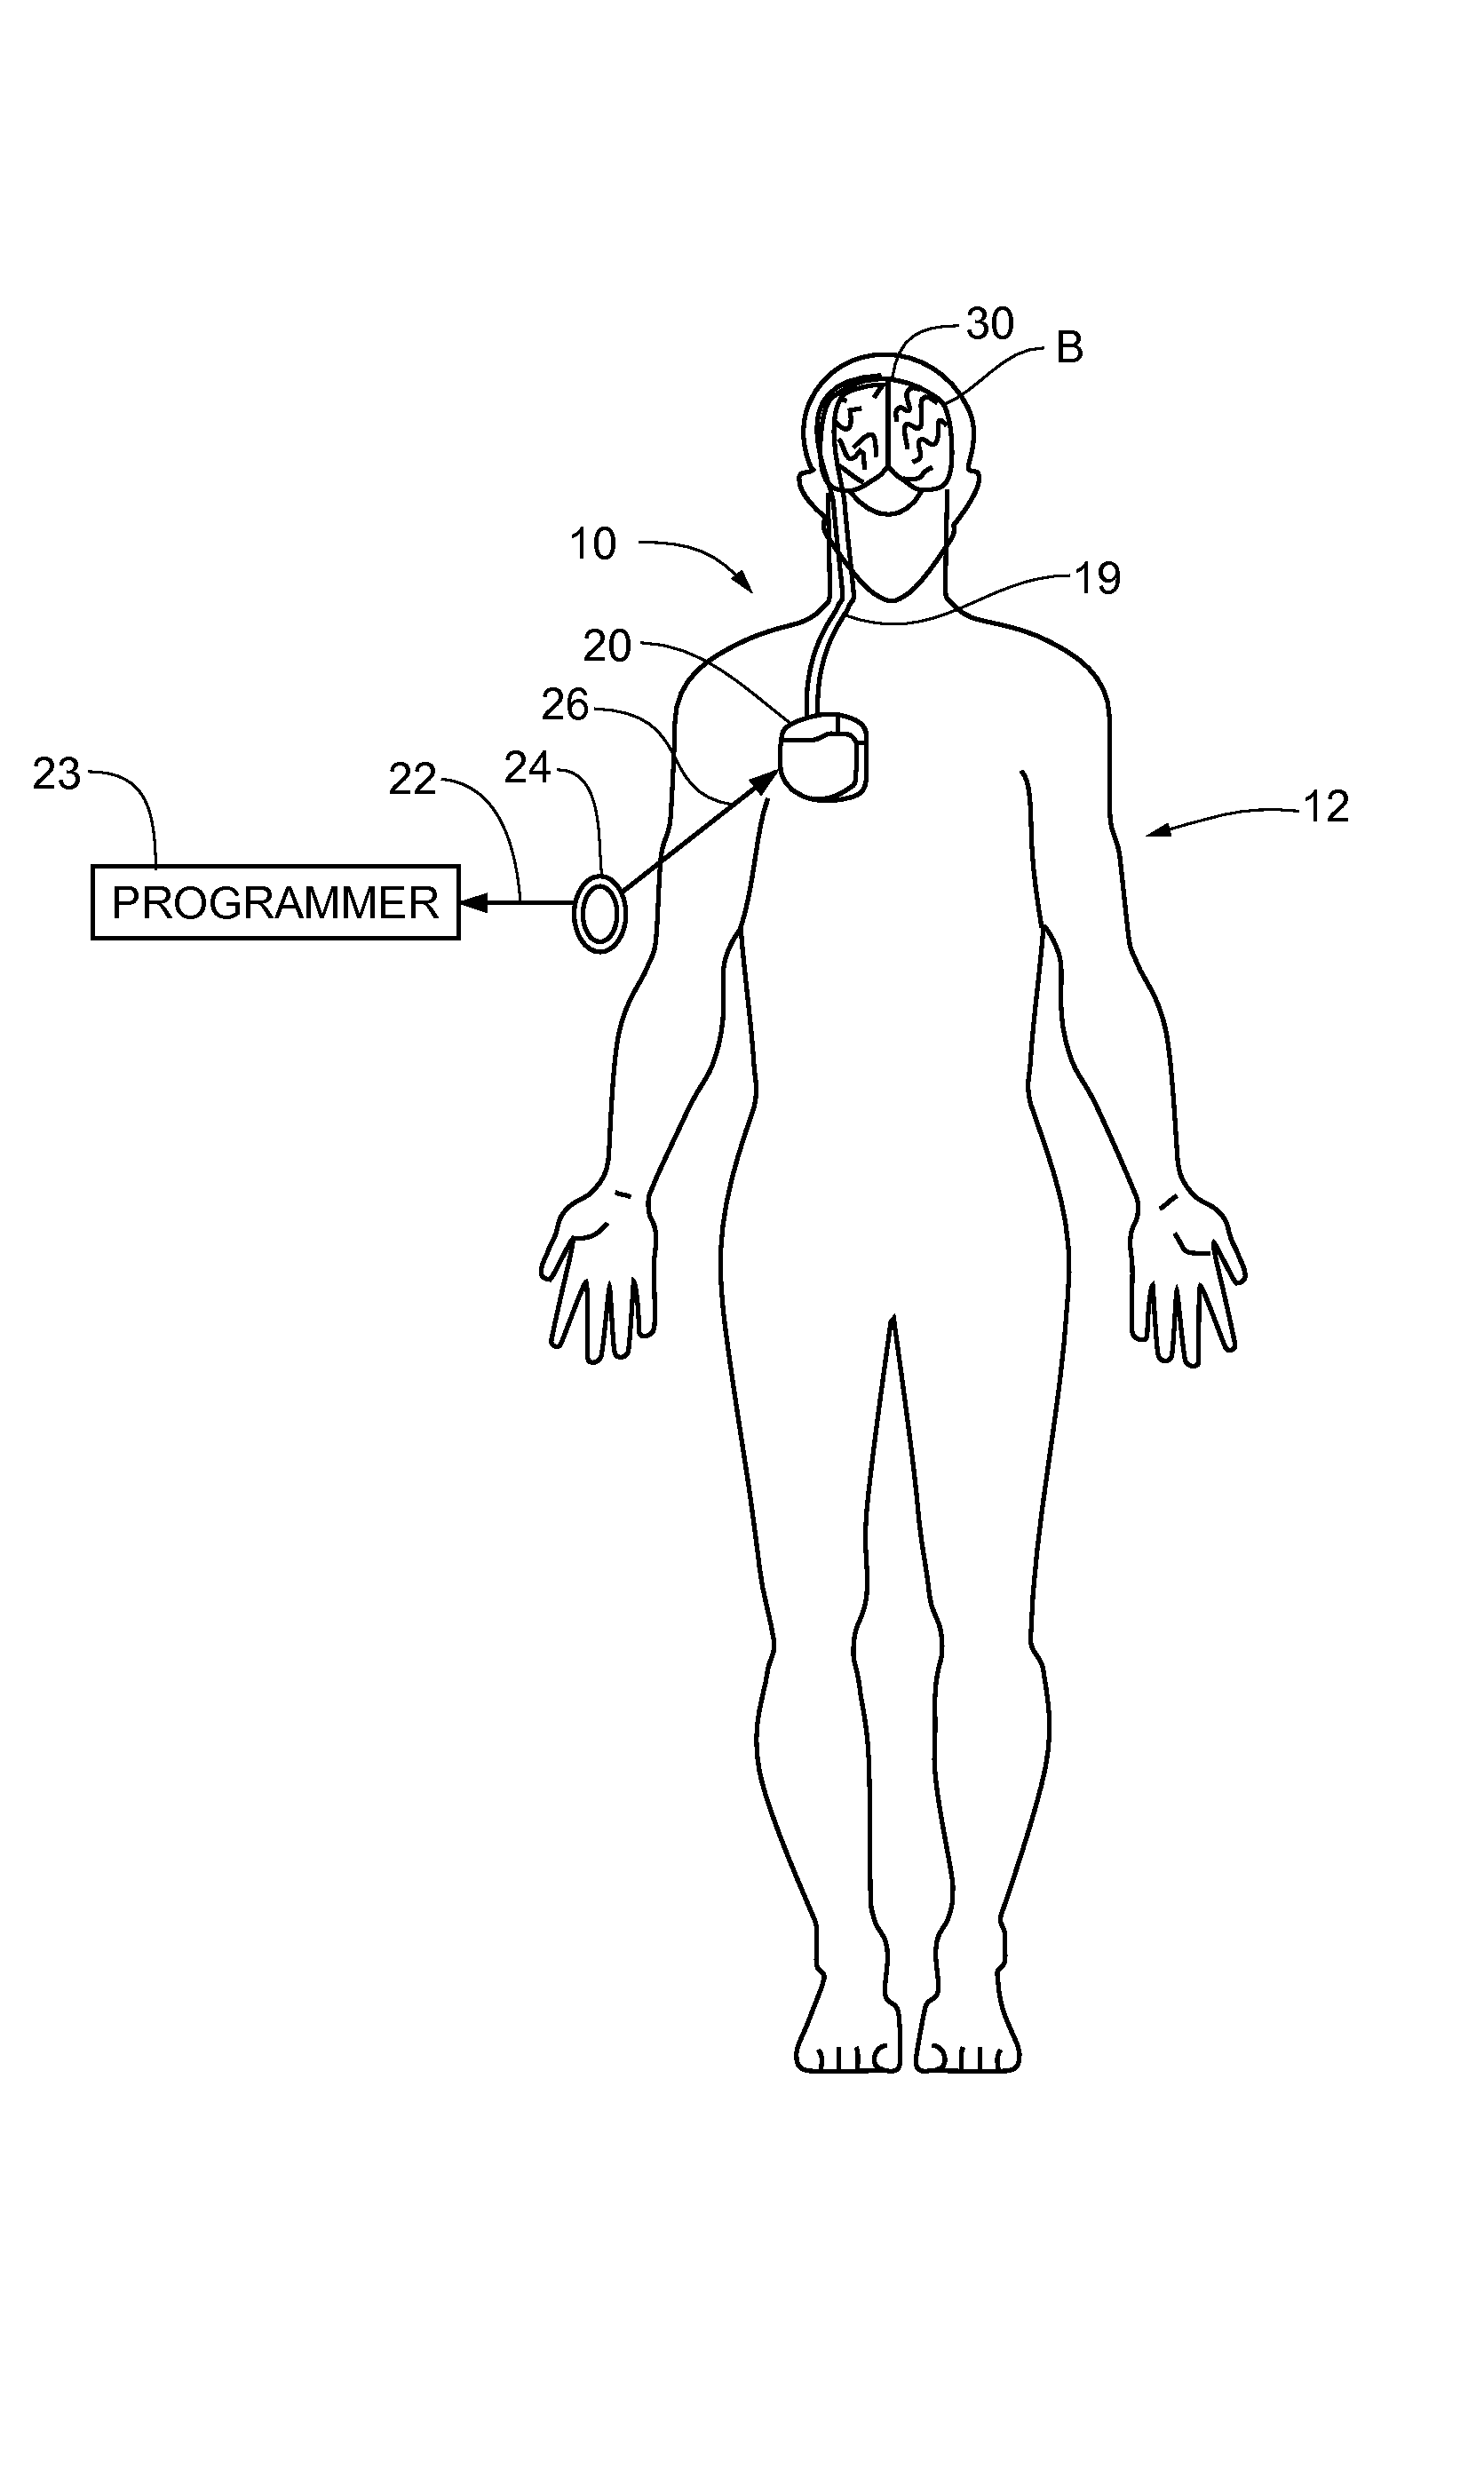 Method and apparatus for detection of nervous system disorders